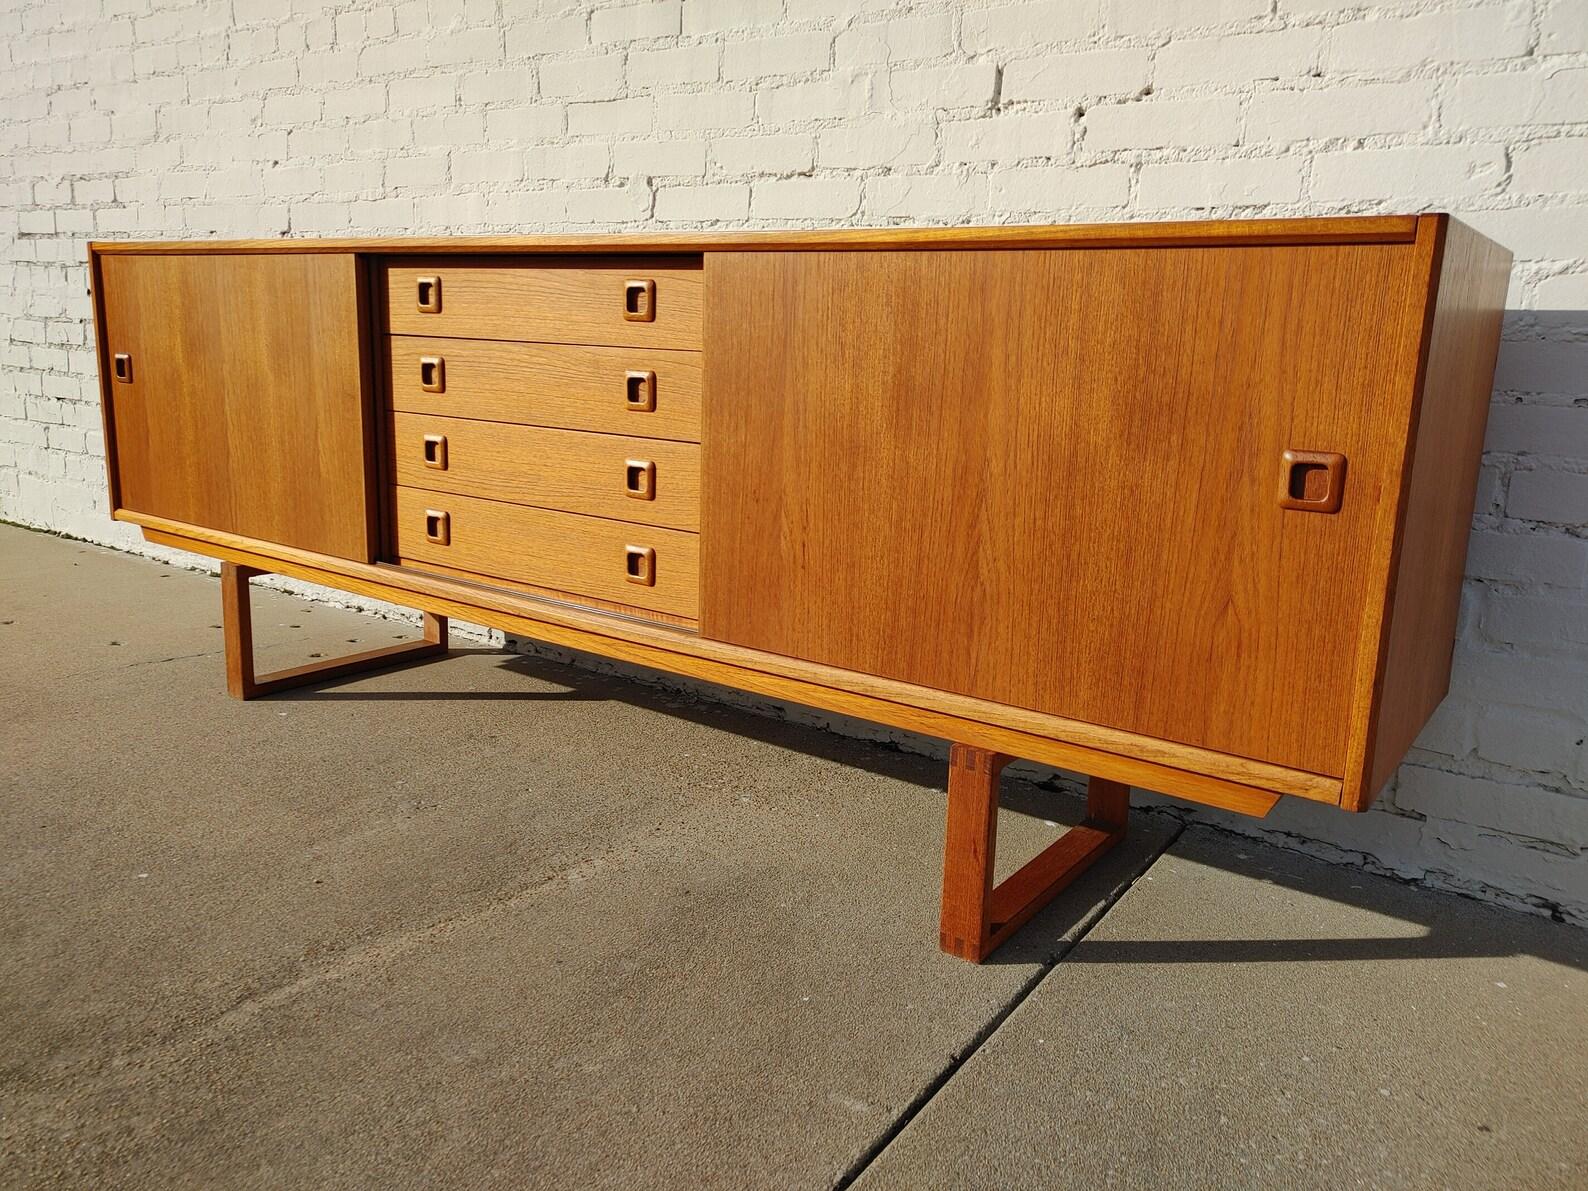 Mid Century Modern Clausen & Son Teak Sideboard

Above average vintage condition and structurally sound. Has some expected slight finish wear and scratching.

Additional information:
Materials: Teak
Vintage from the 1960s
Dimensions: 82 W x 18  D x